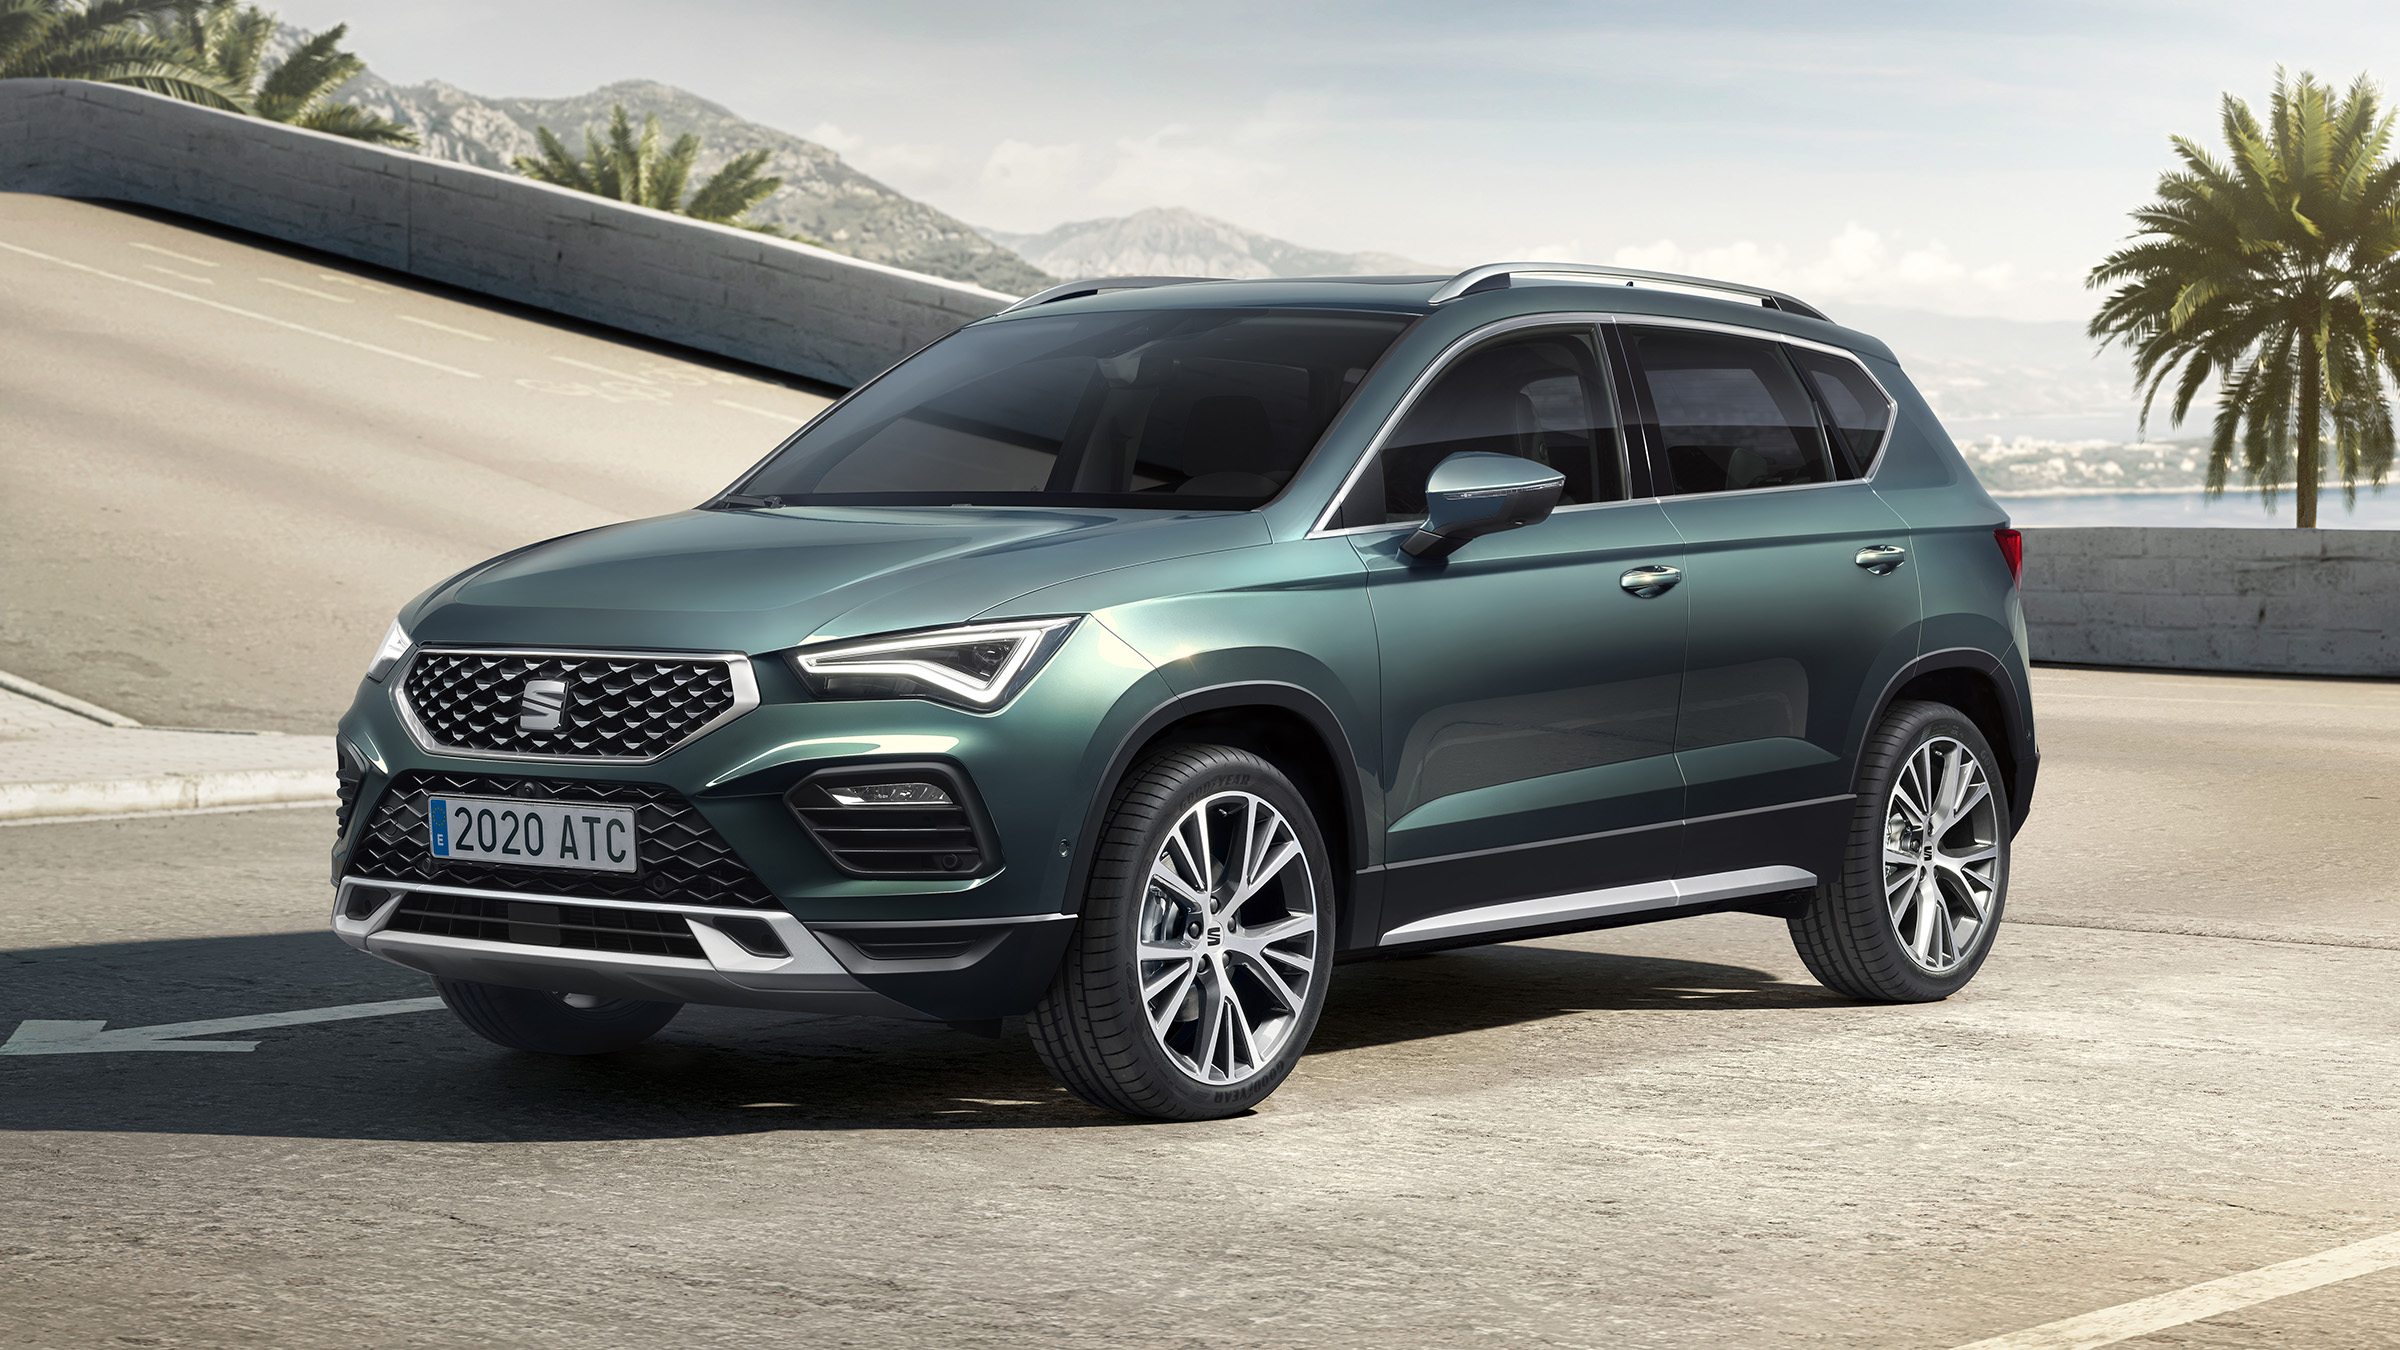 New 2020 SEAT Ateca priced from £23,670  Carbuyer